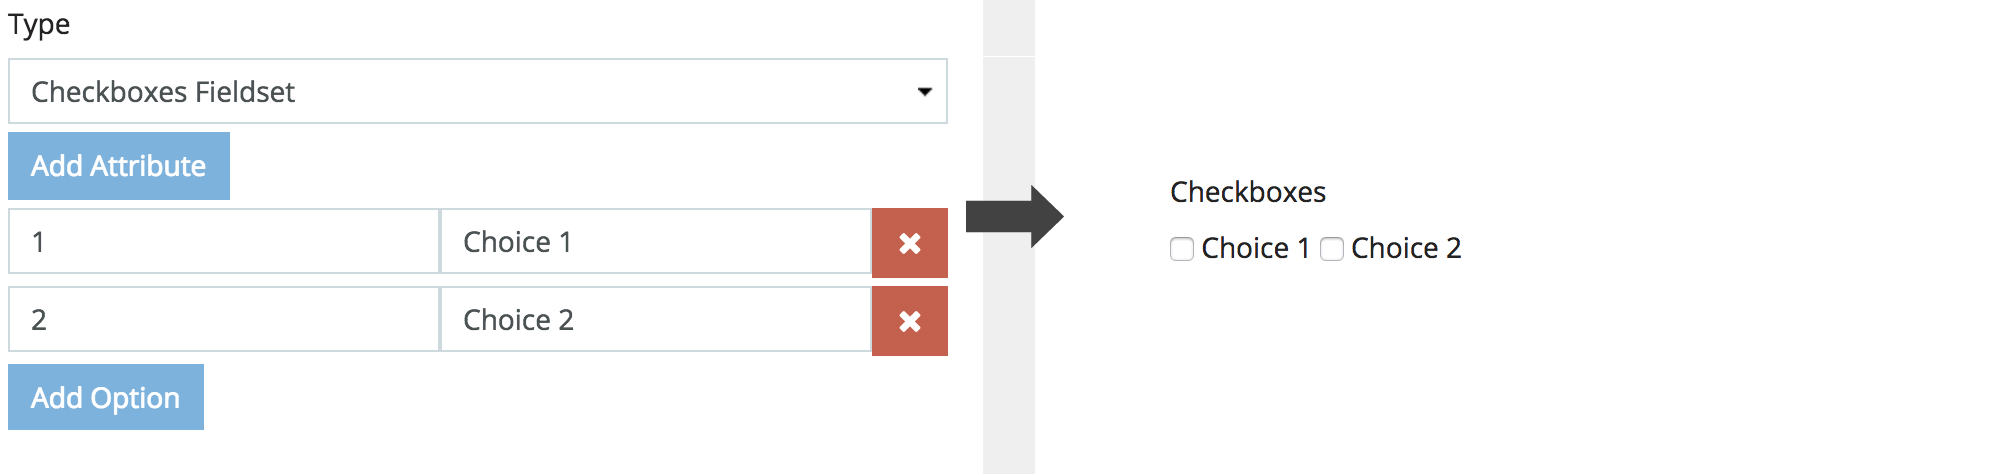 Checkboxes Field